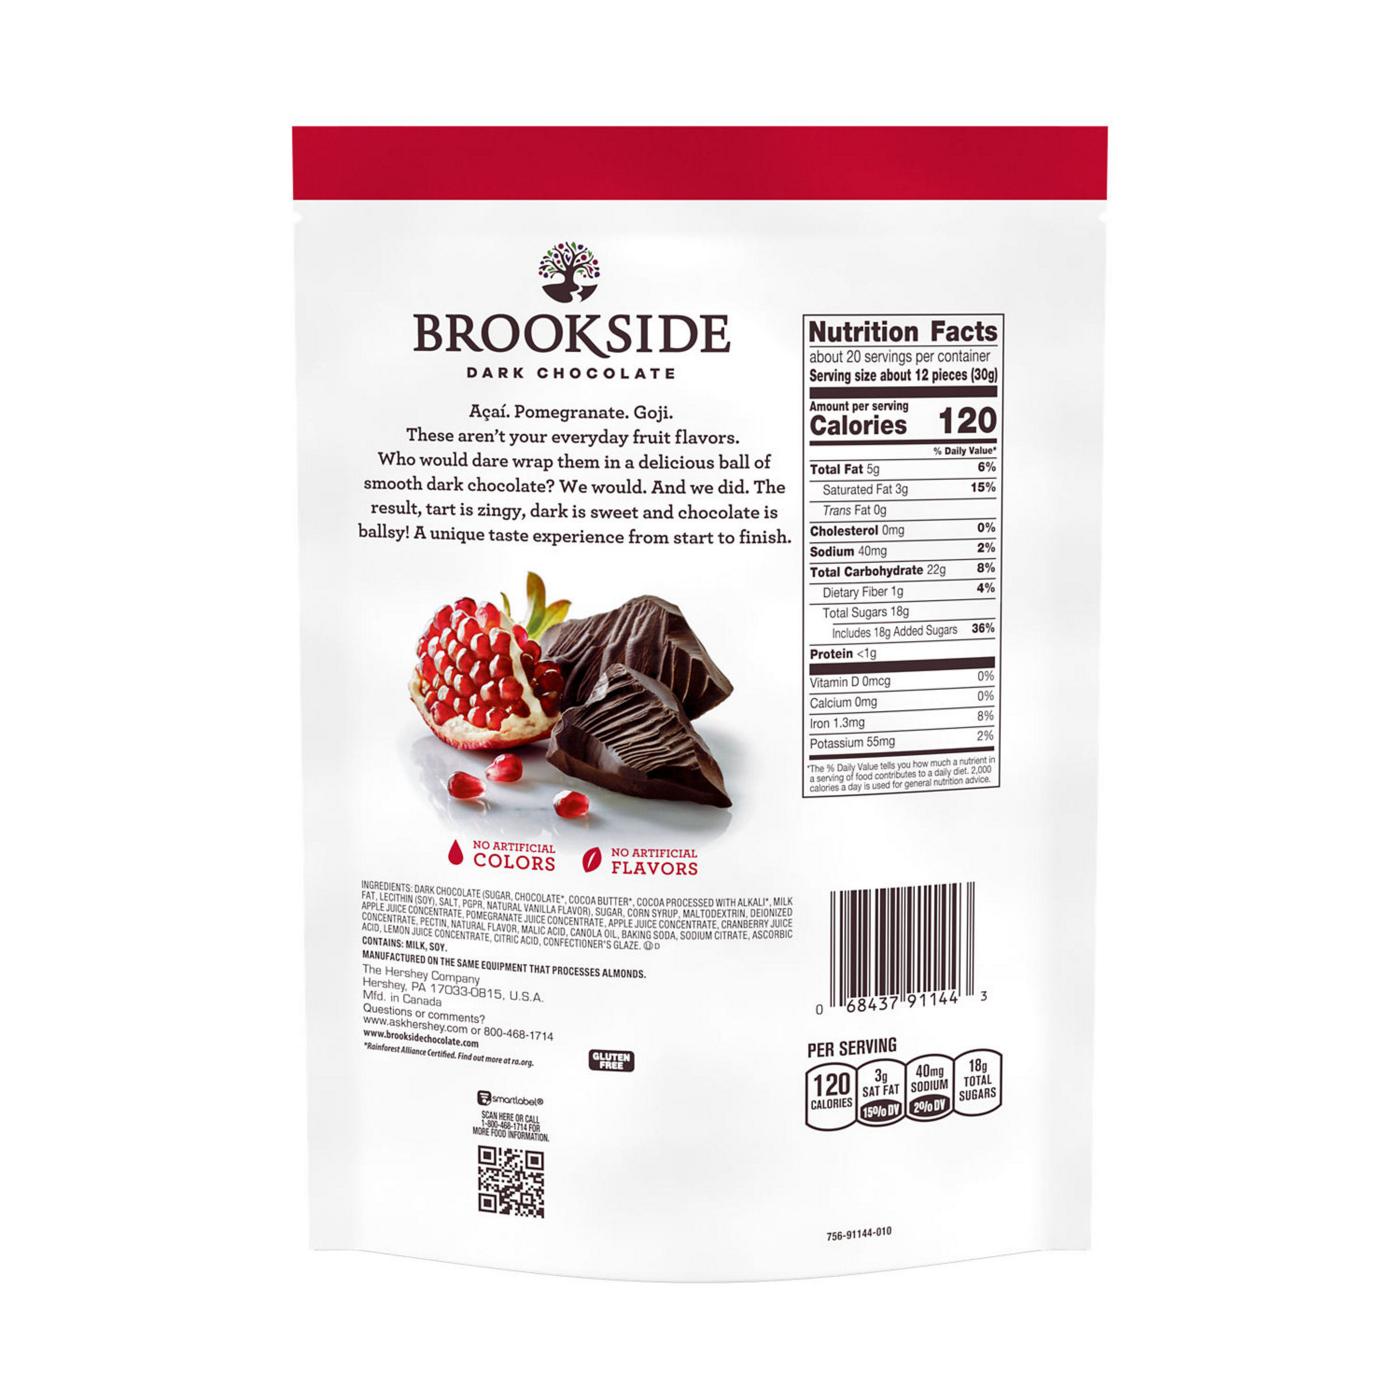 Brookside Dark Chocolate Pomegranate Flavored Snacking Chocolate Bag; image 4 of 4